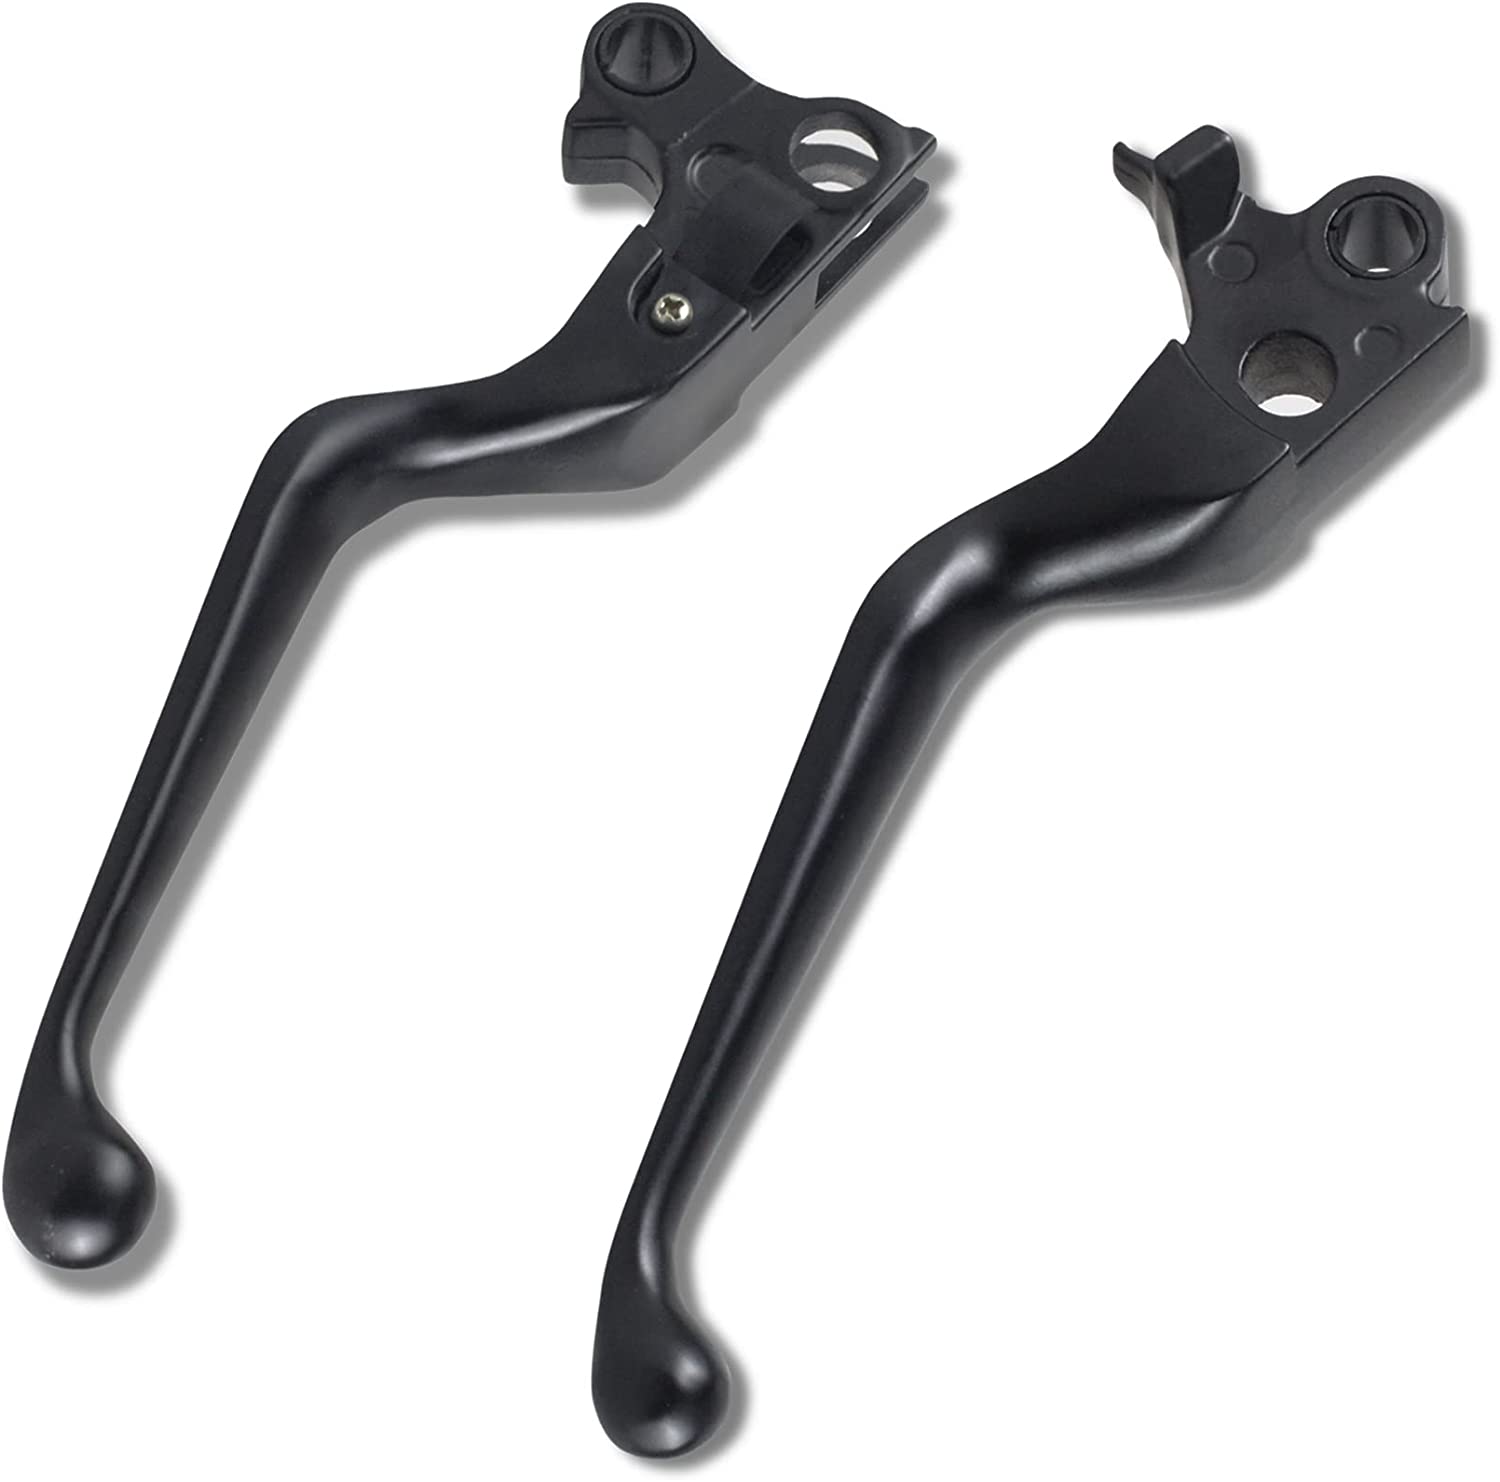 NTHREEAUTO Brake Clutch Lever Hand Levers Compatible with Harley Sport